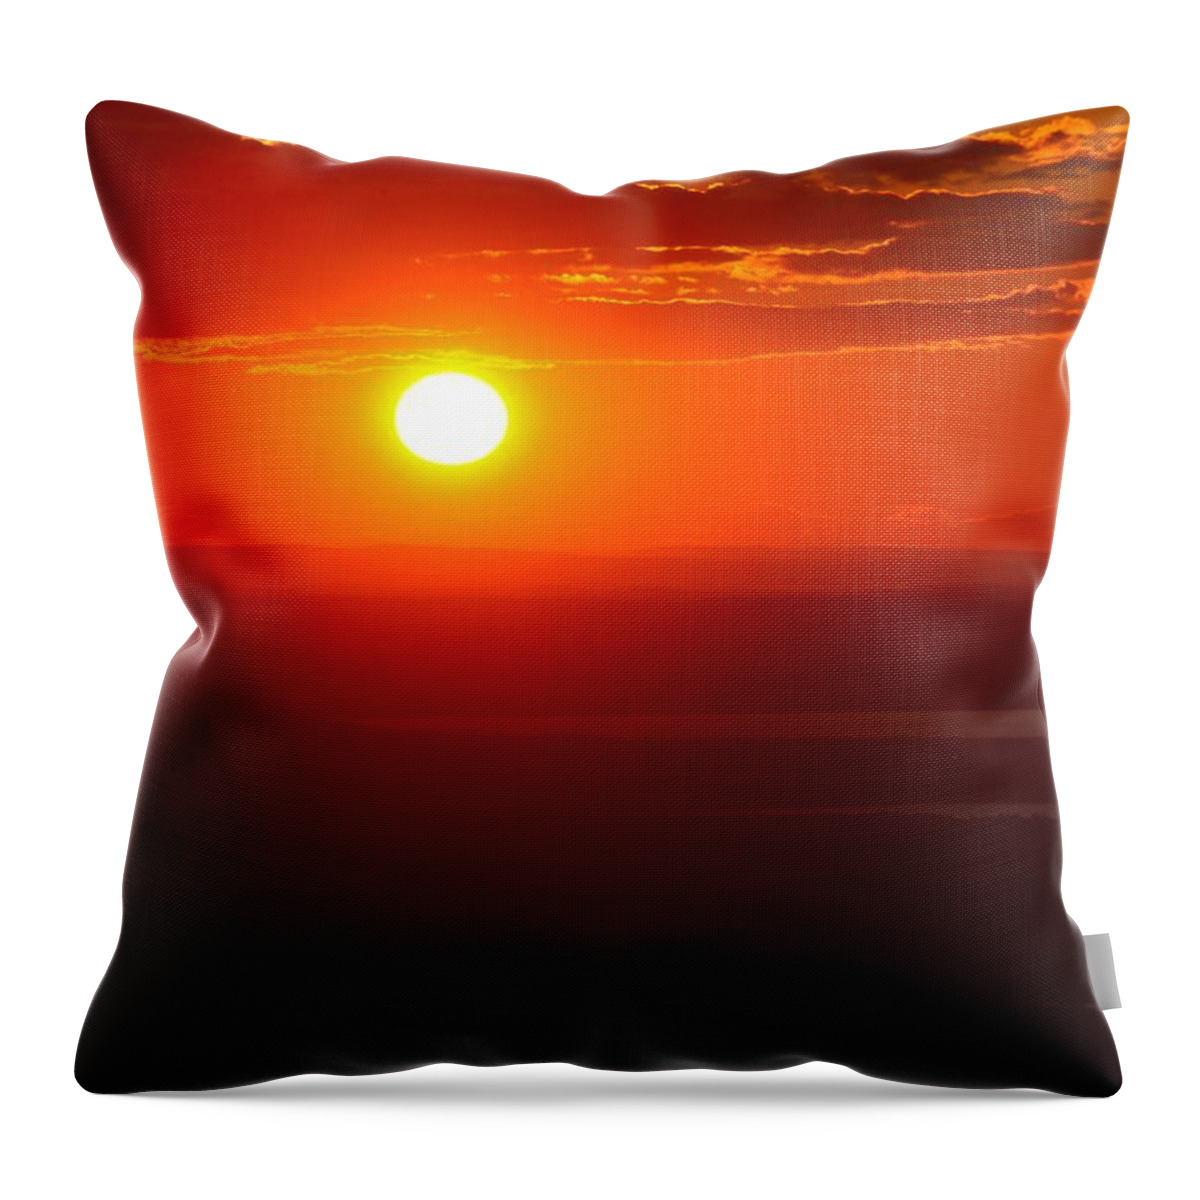  Throw Pillow featuring the photograph Deep Orange Sky by Polly Castor